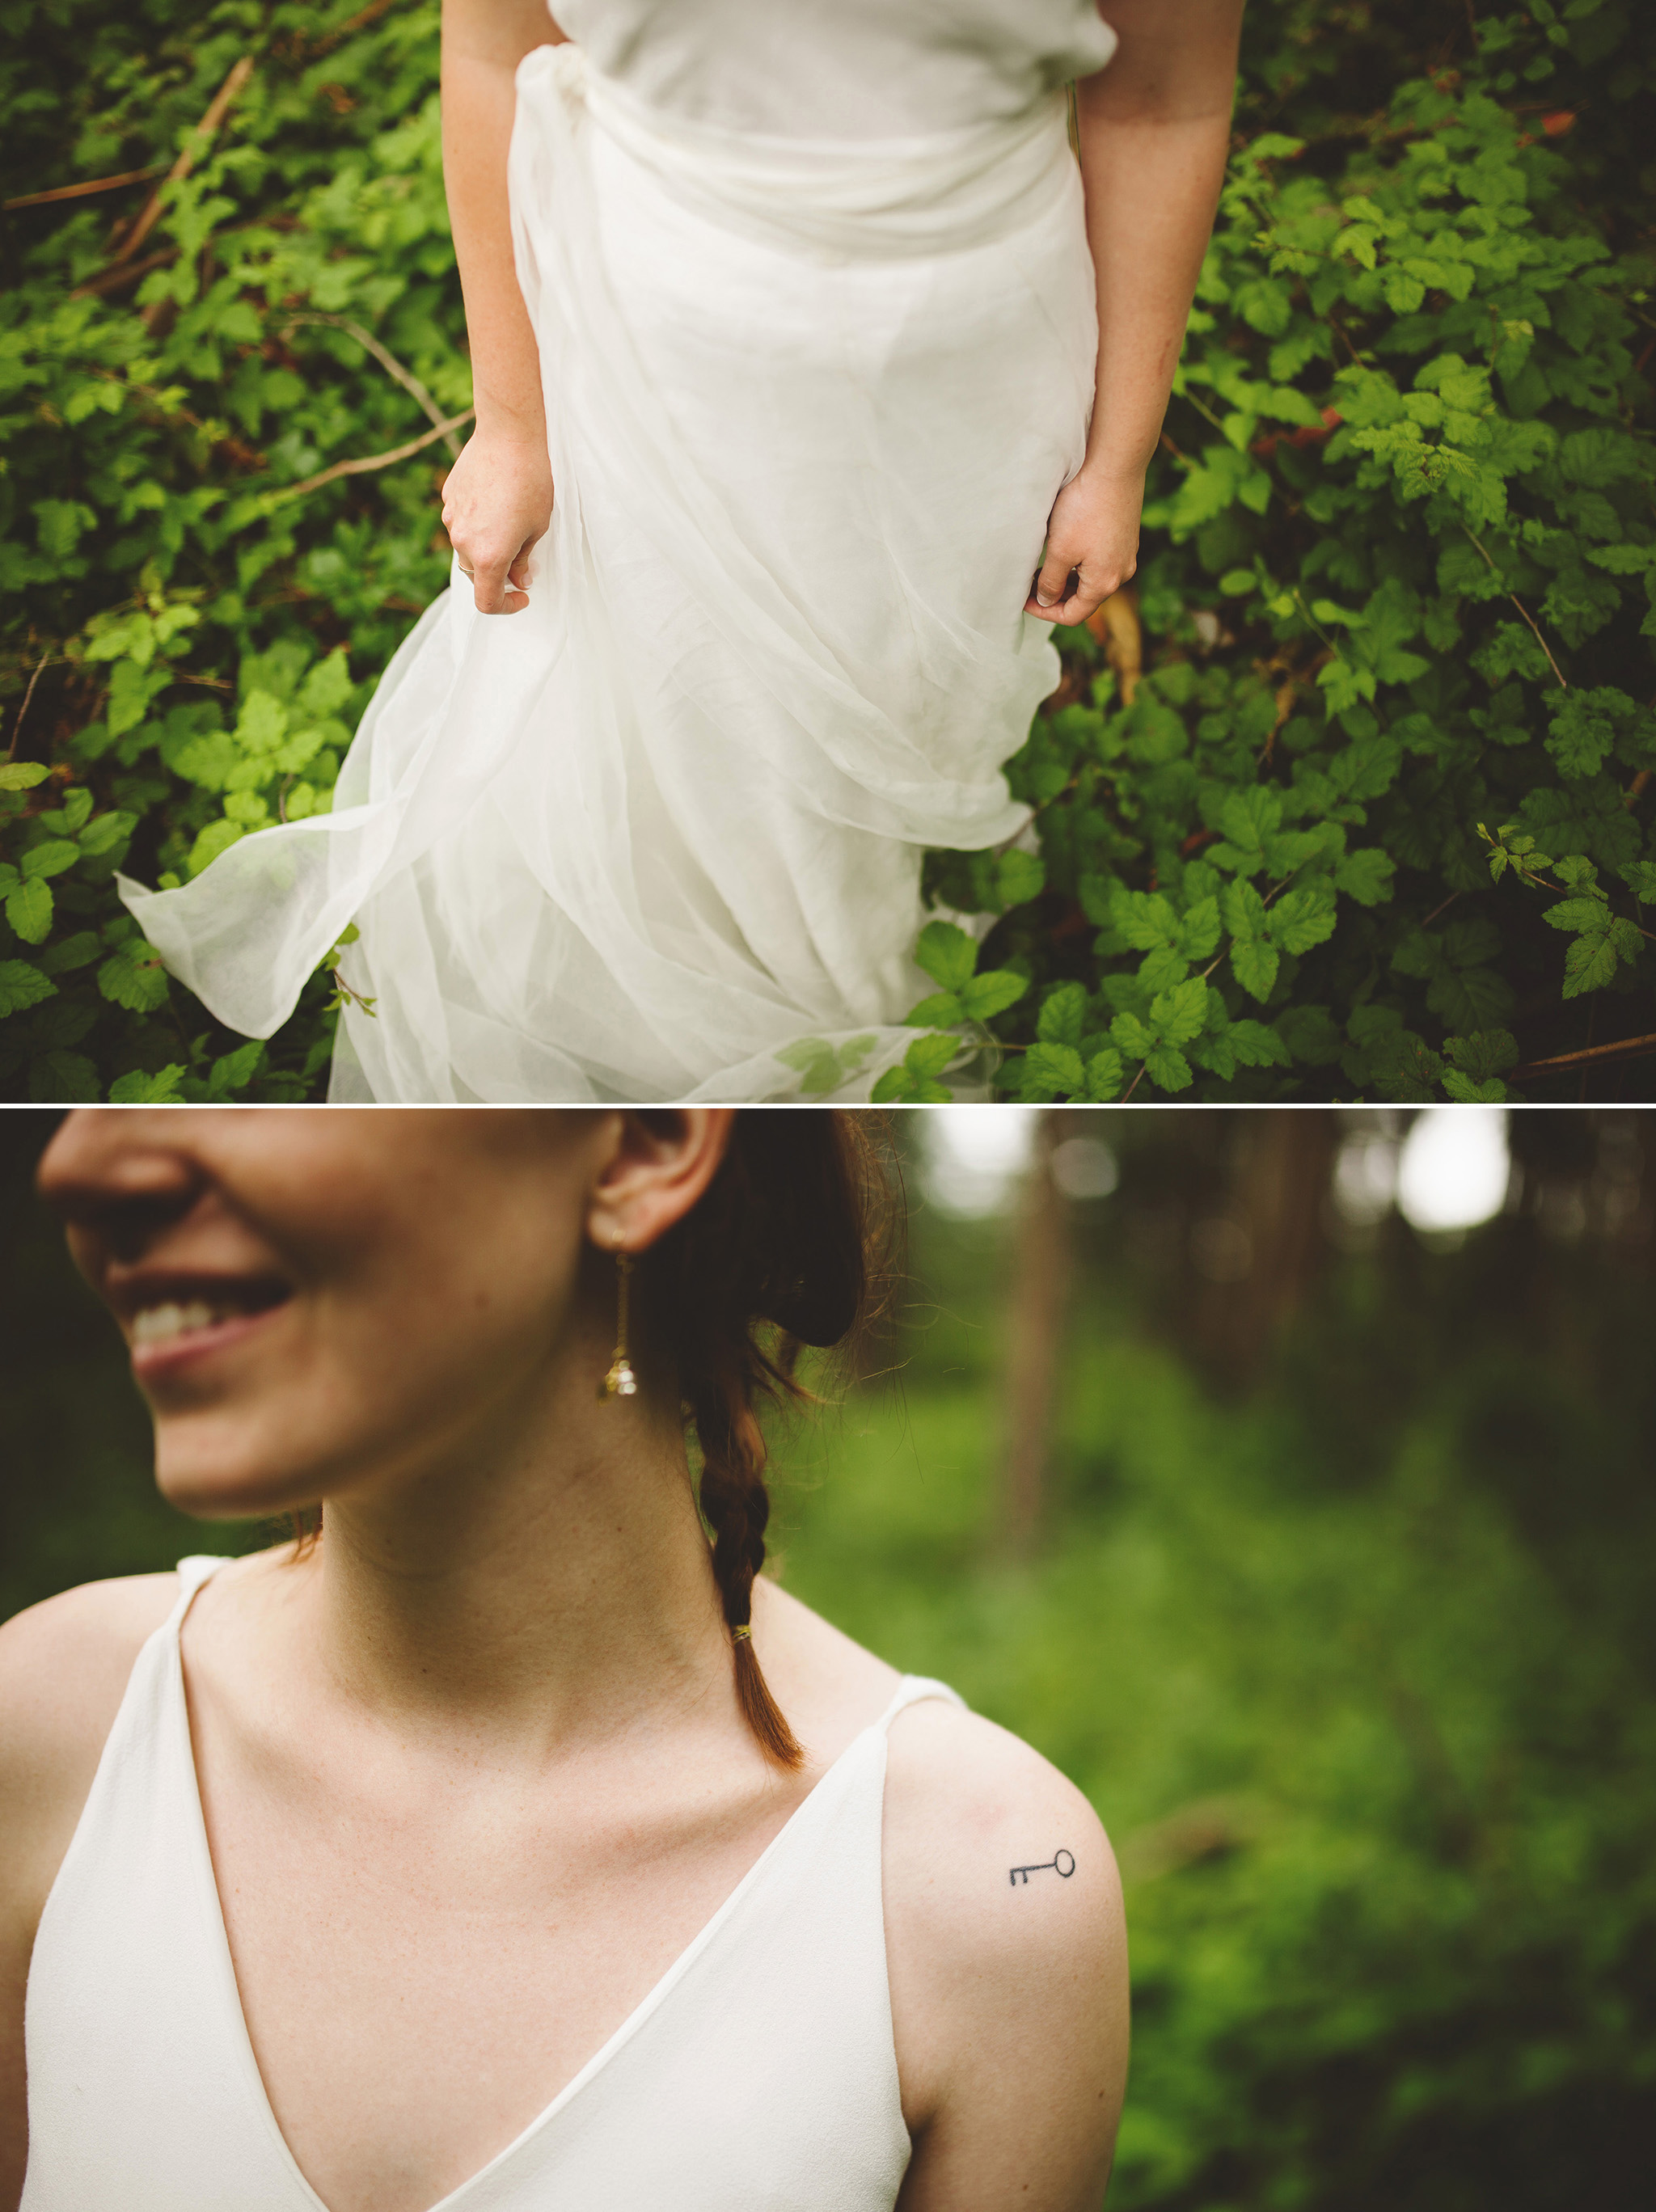 Northern California wedding in the woods